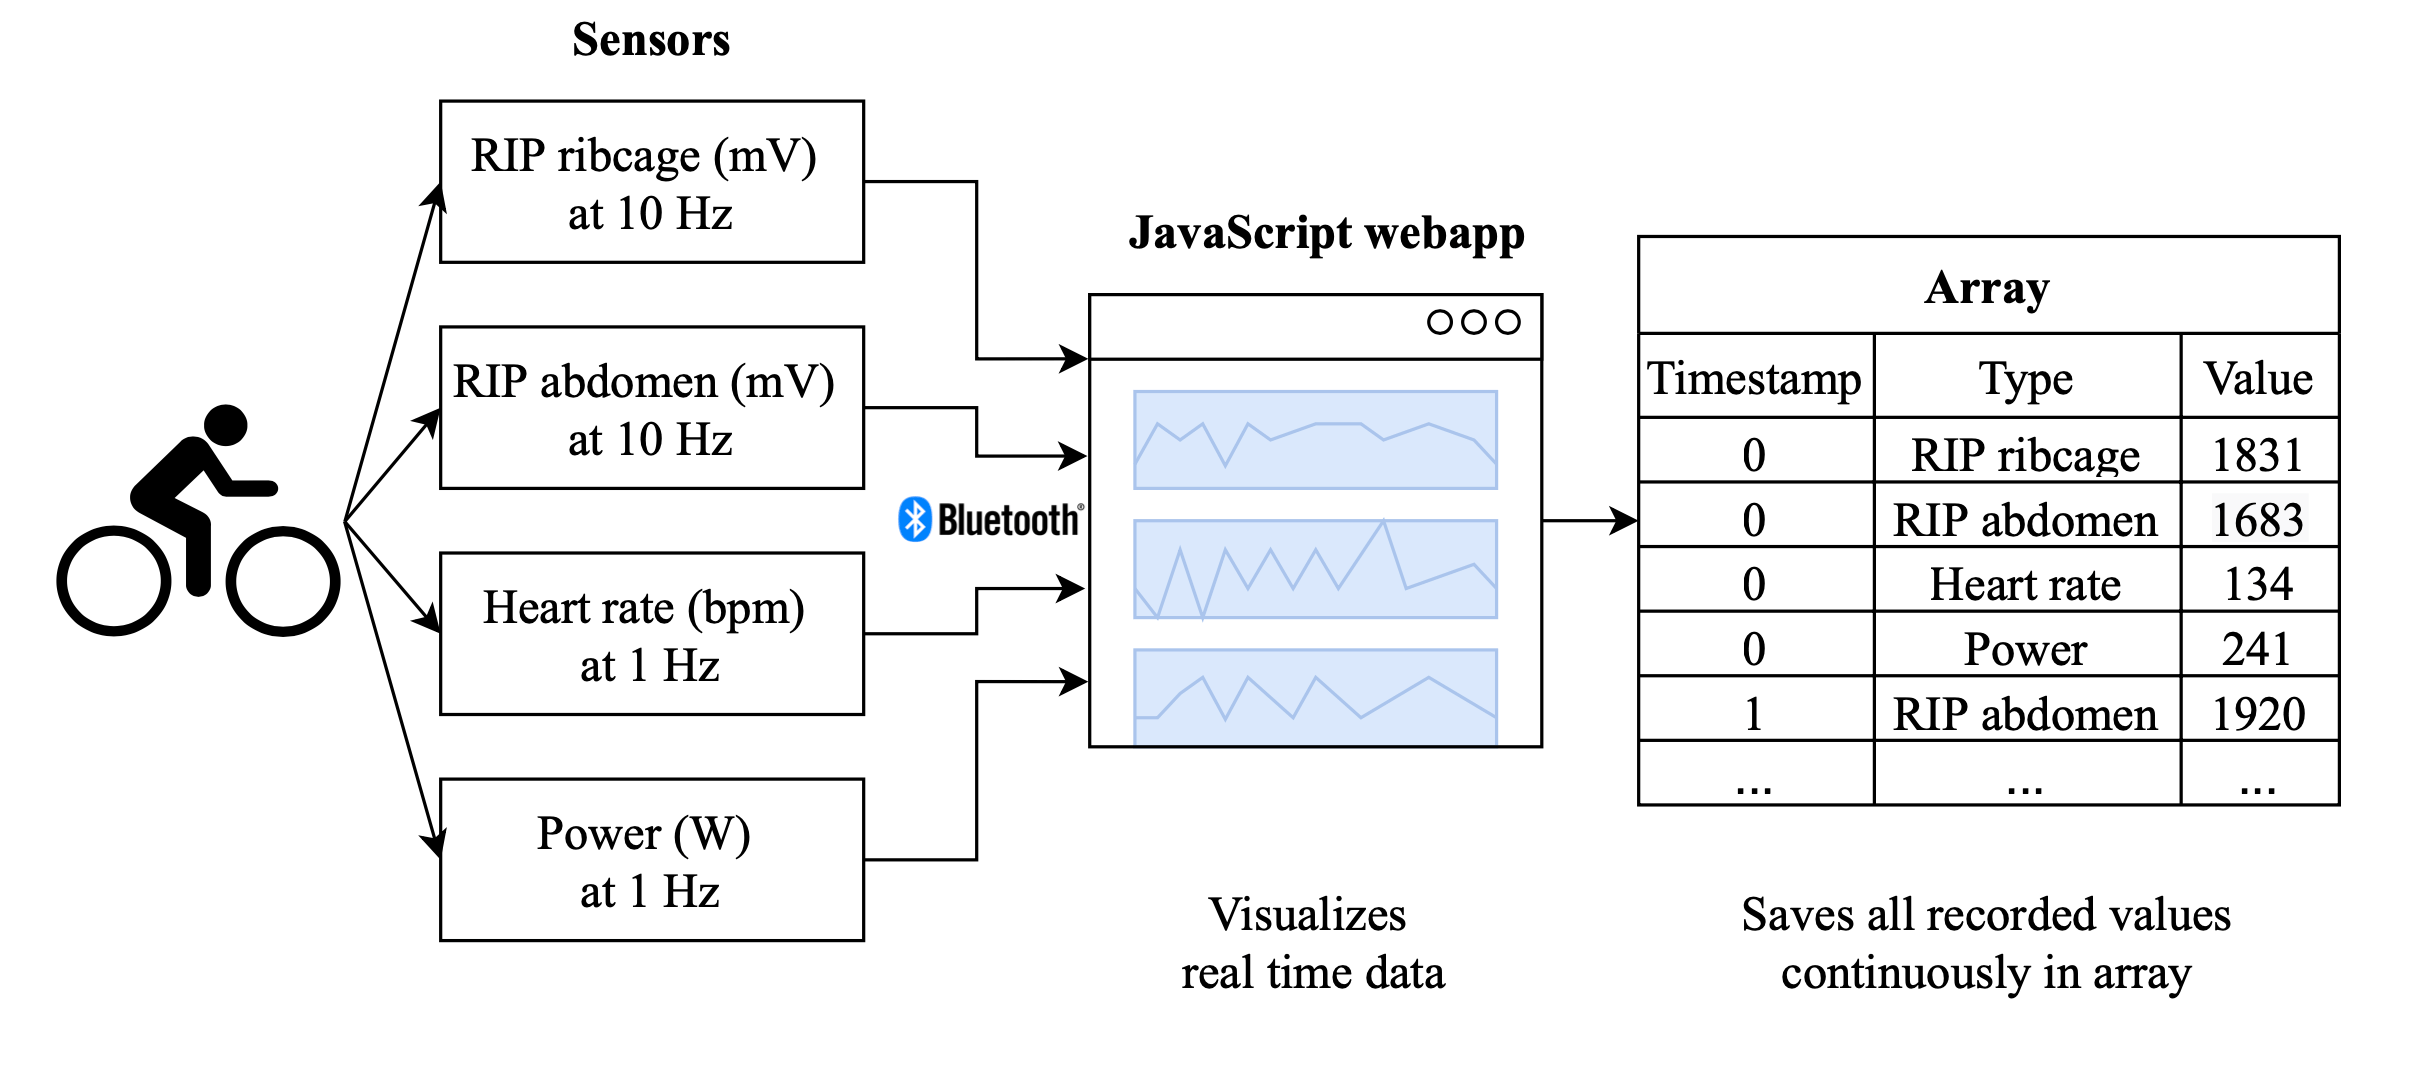 Figure showing the dataflow of the data collection